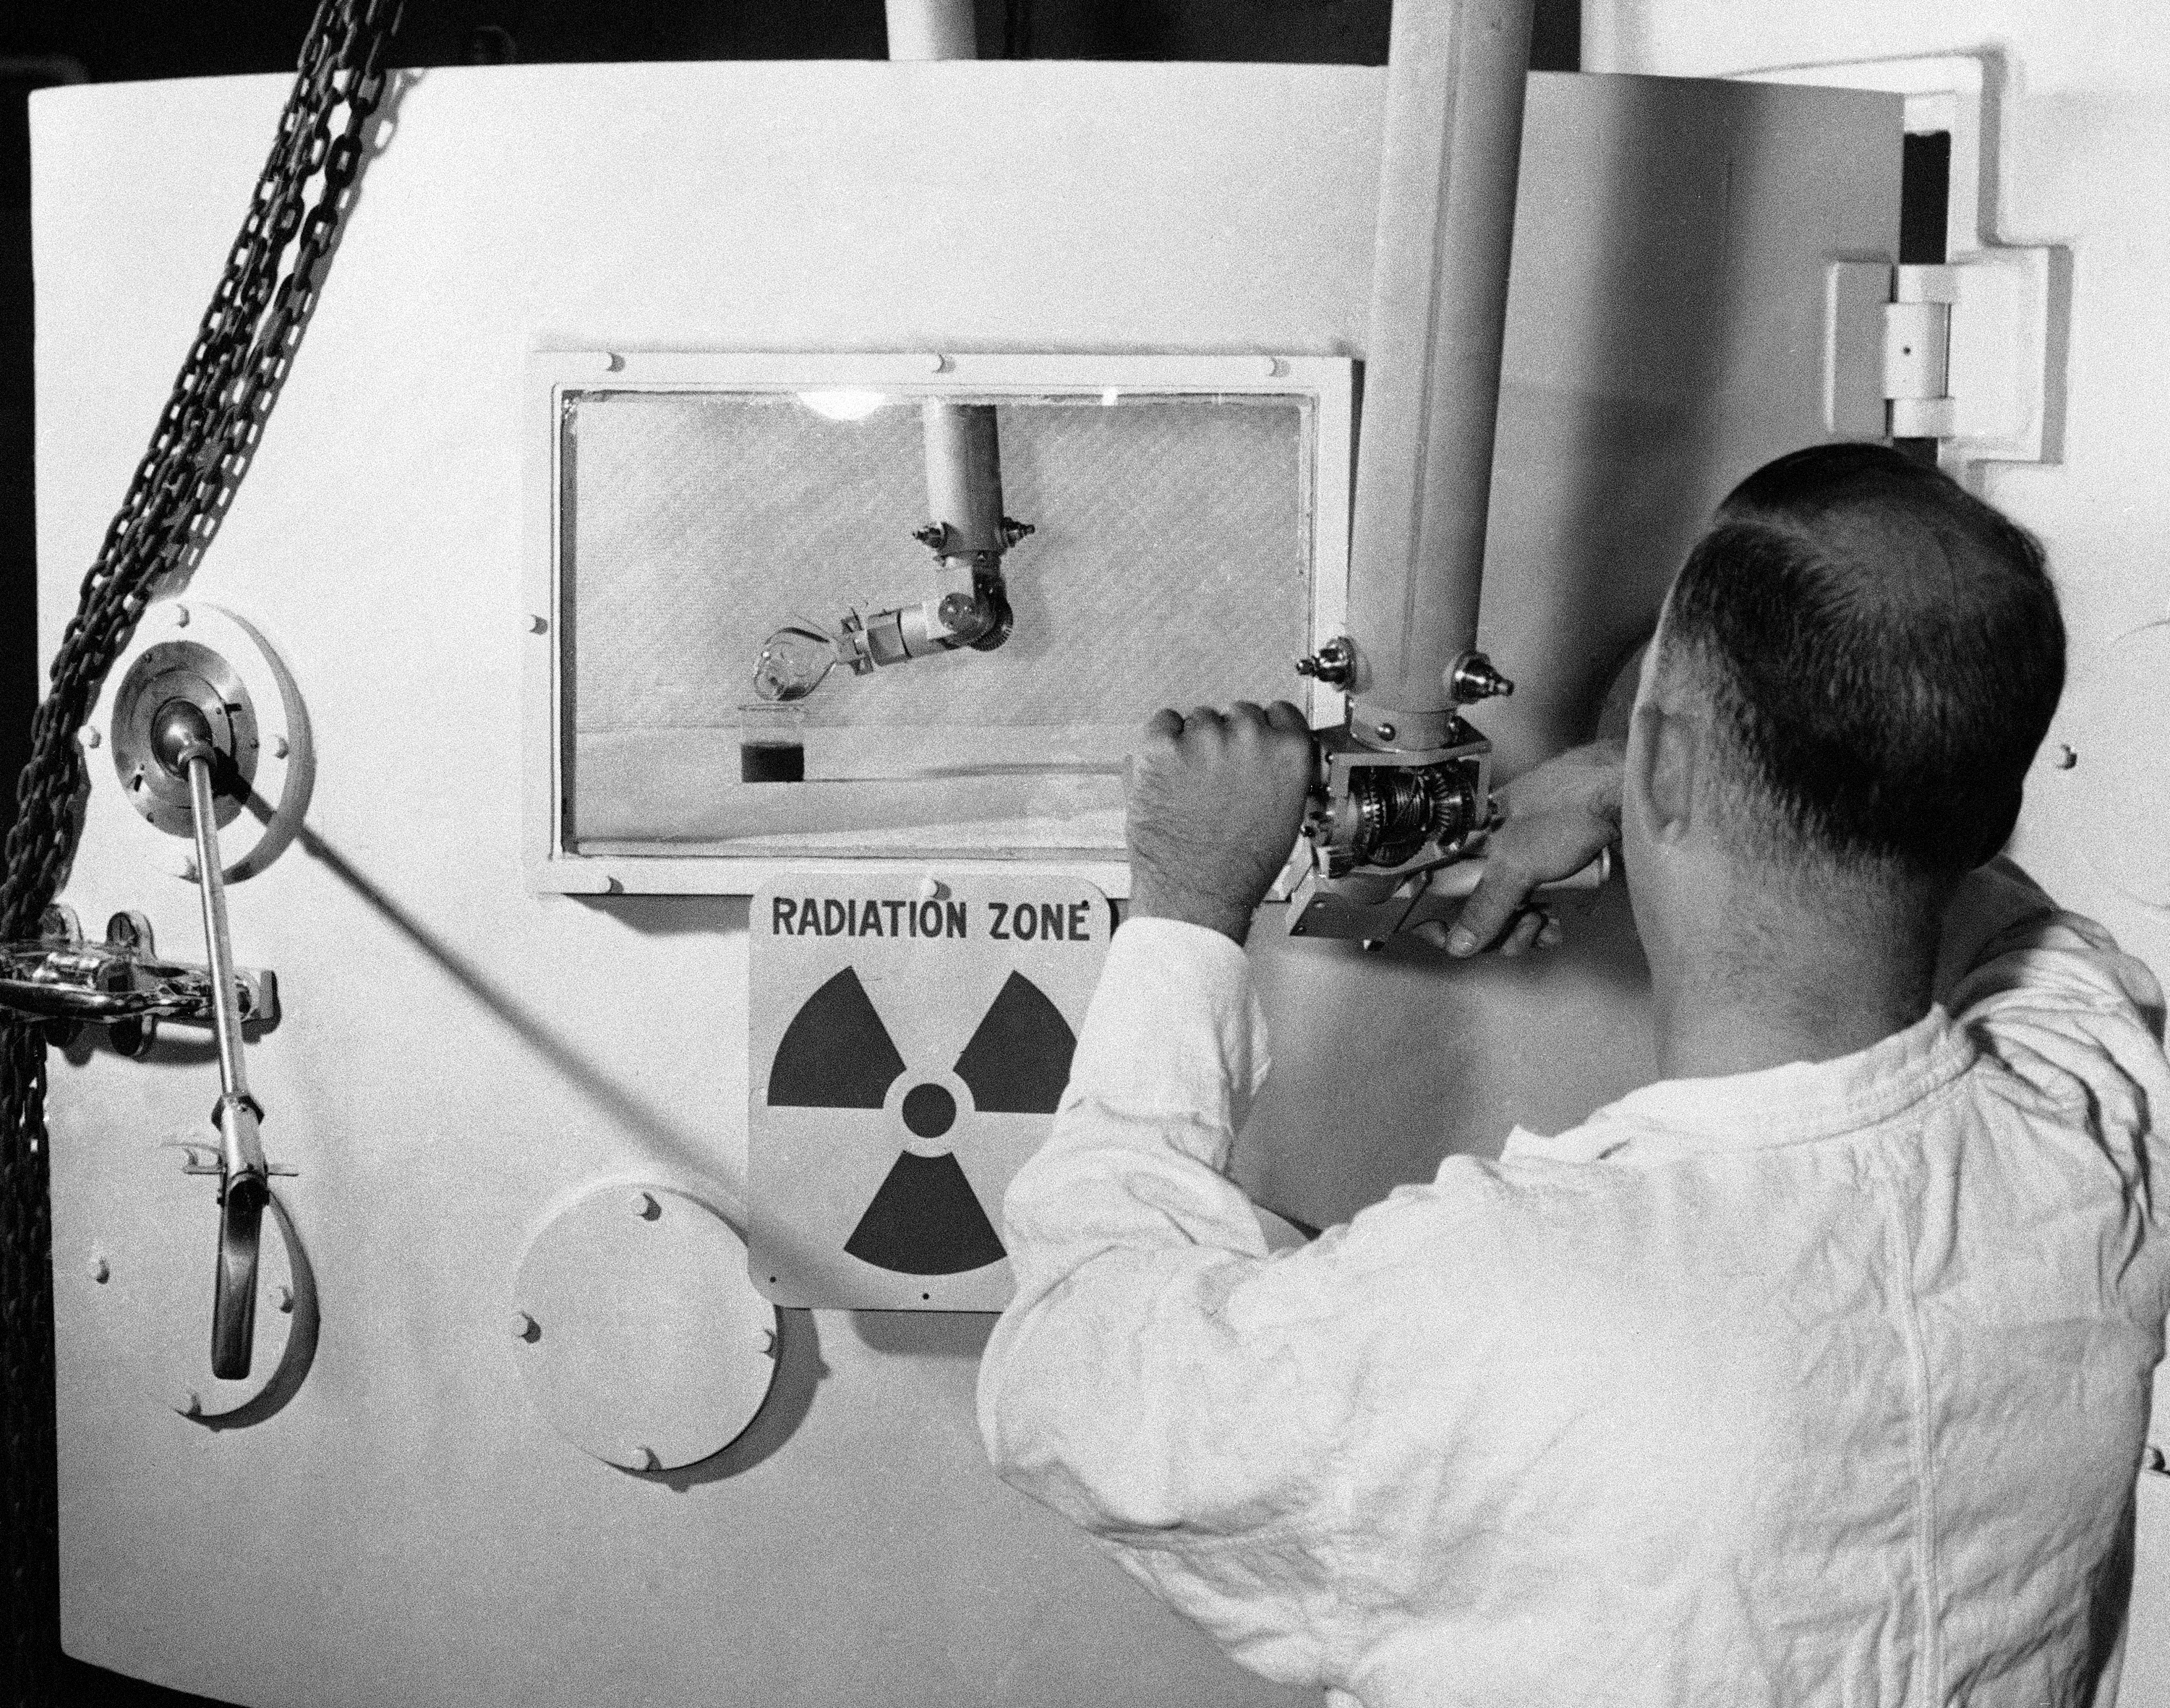 A man works a lever in front of a sign that reads “Radiation Zone”